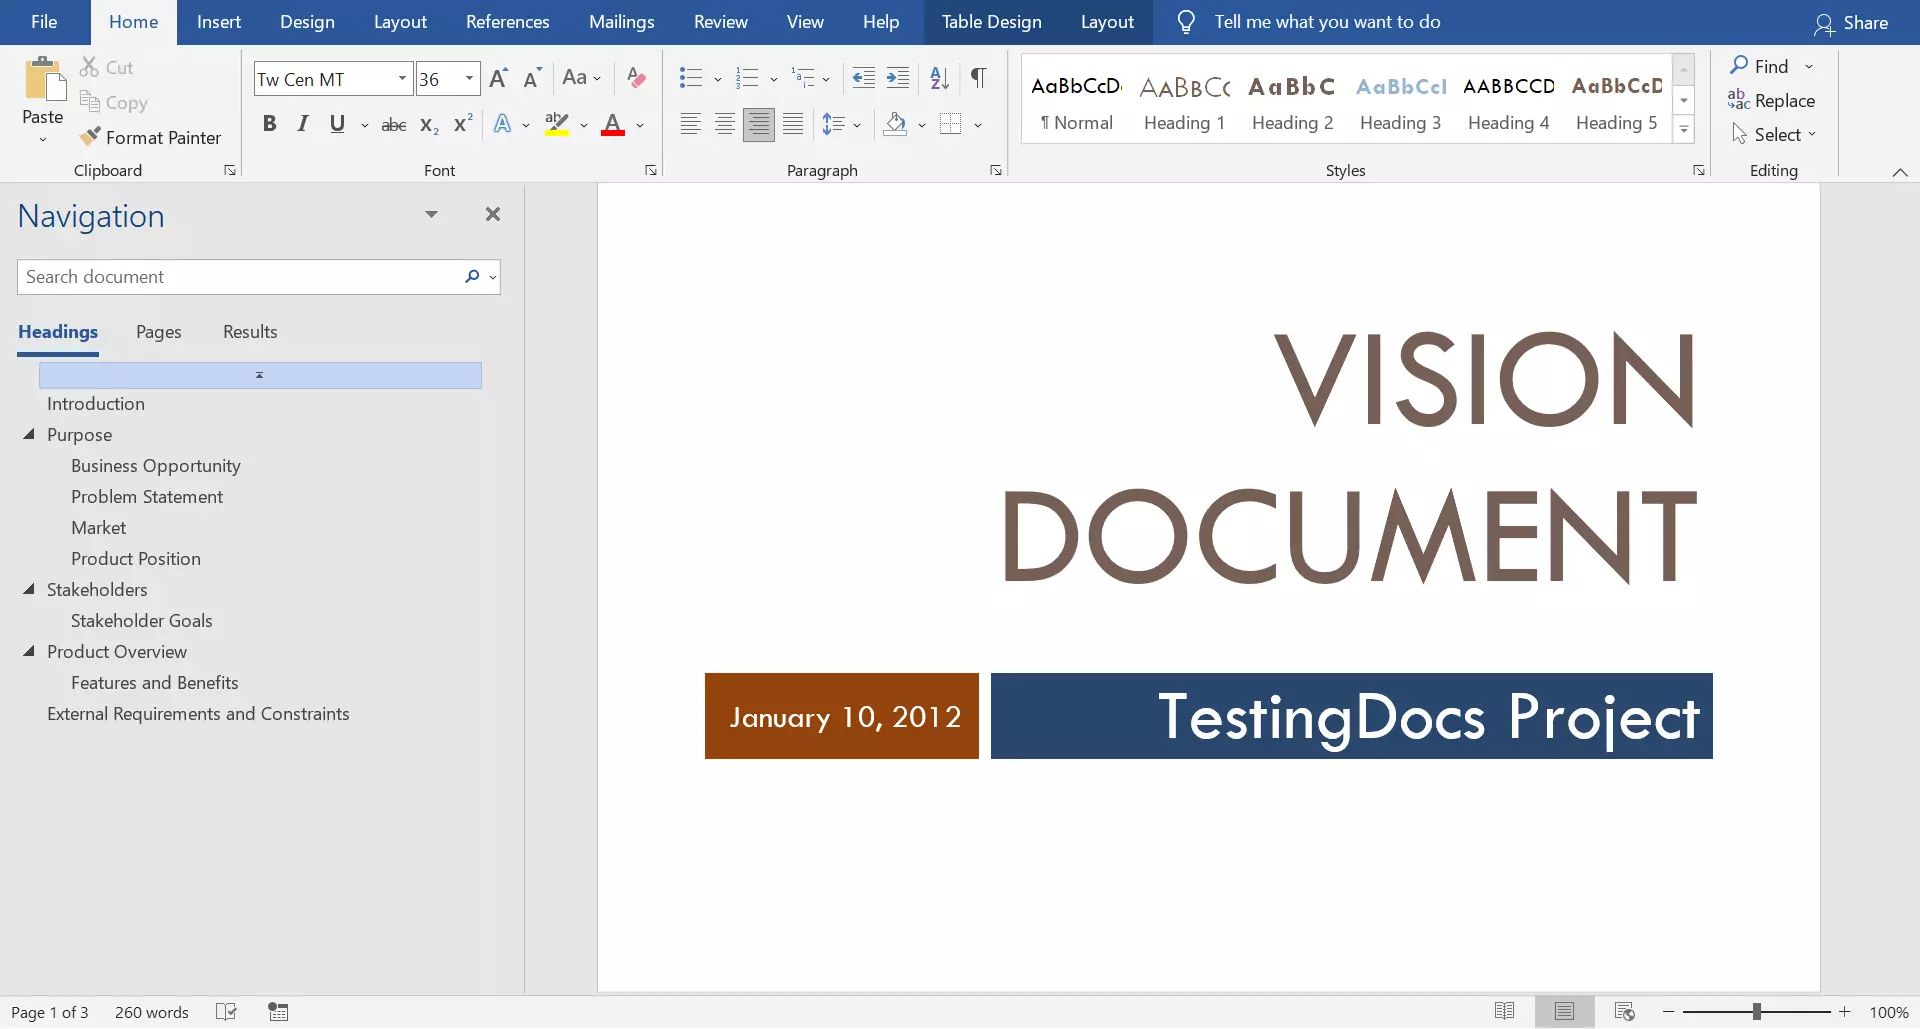 Project Vision Document